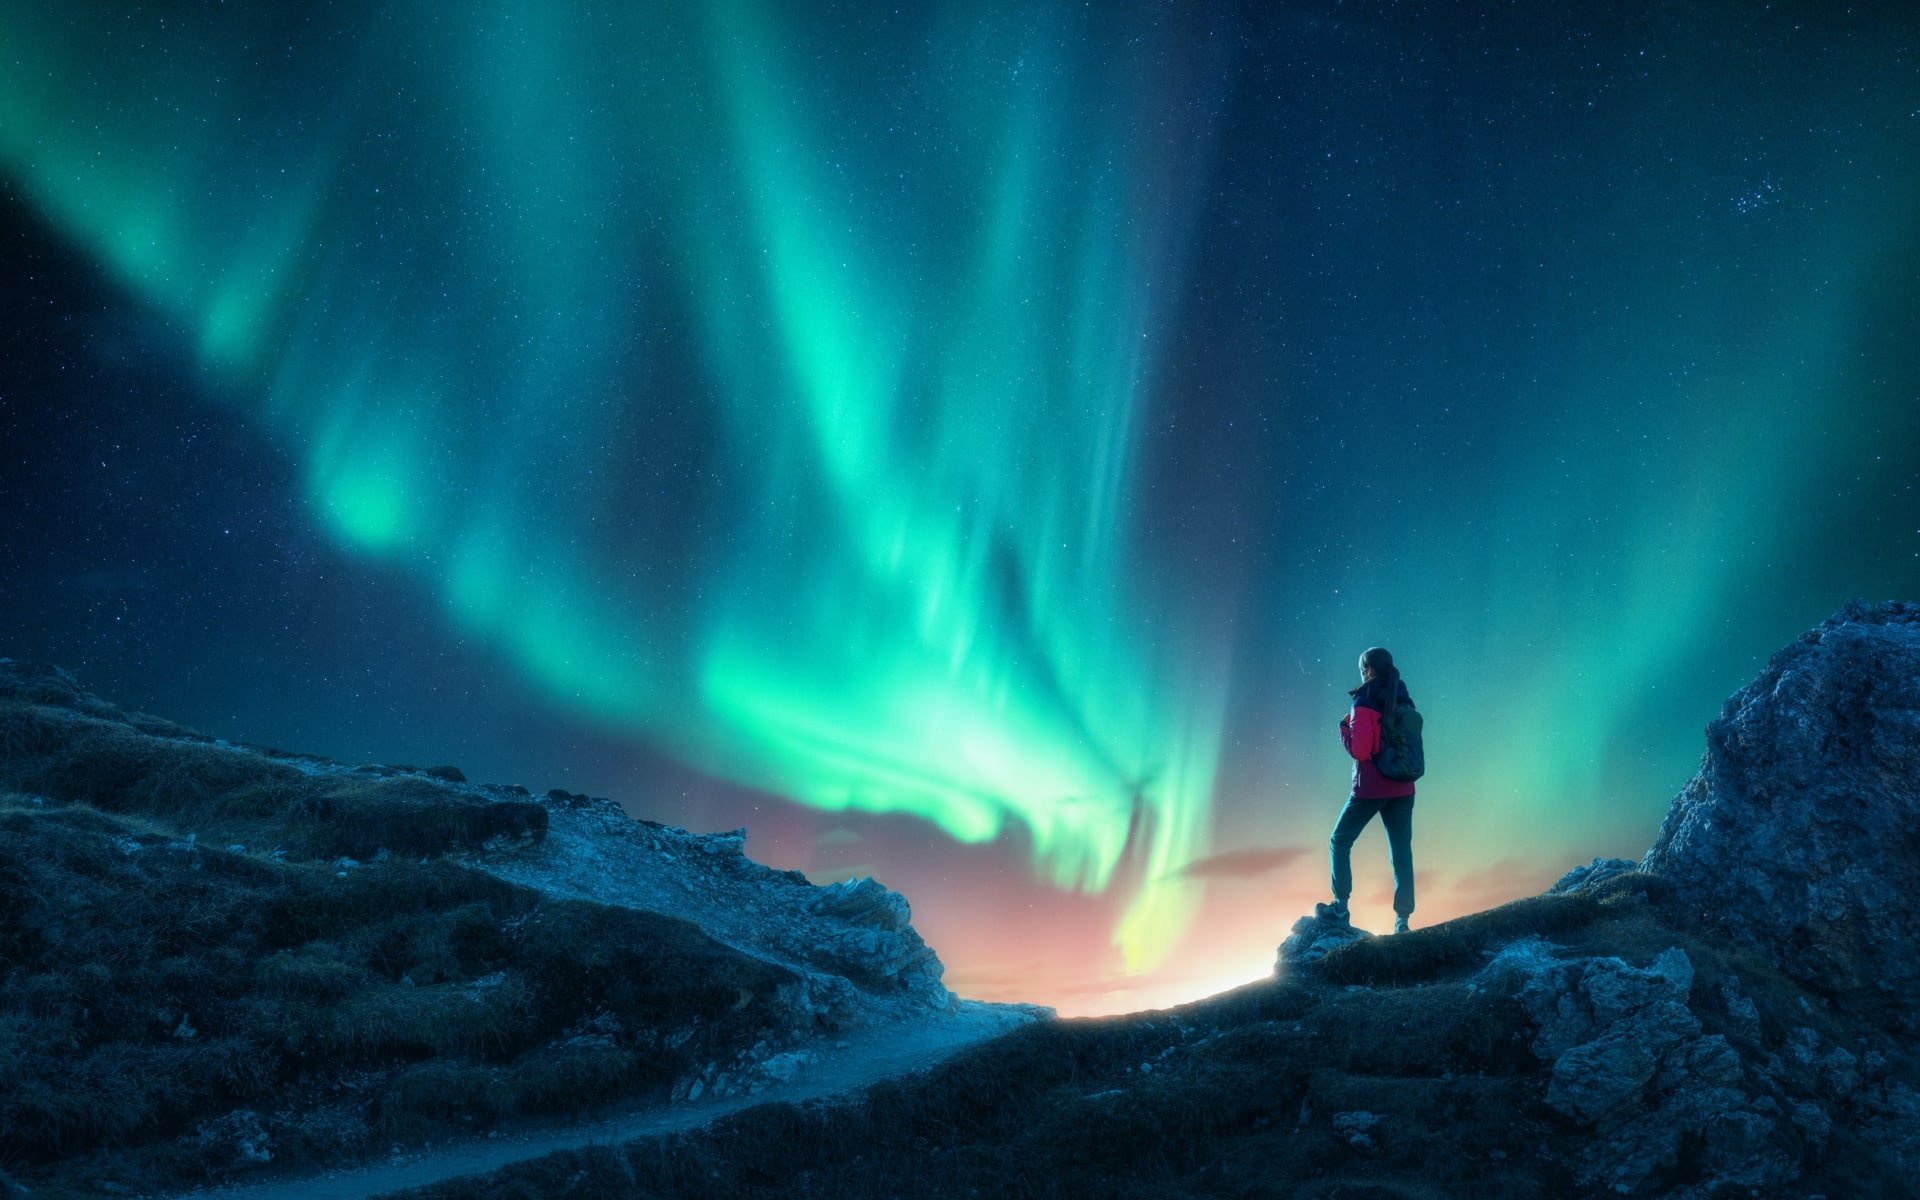 A woman stands on a rocky high-point, watching as the sky turns vibrant blues and greens on a Northern Lights display.